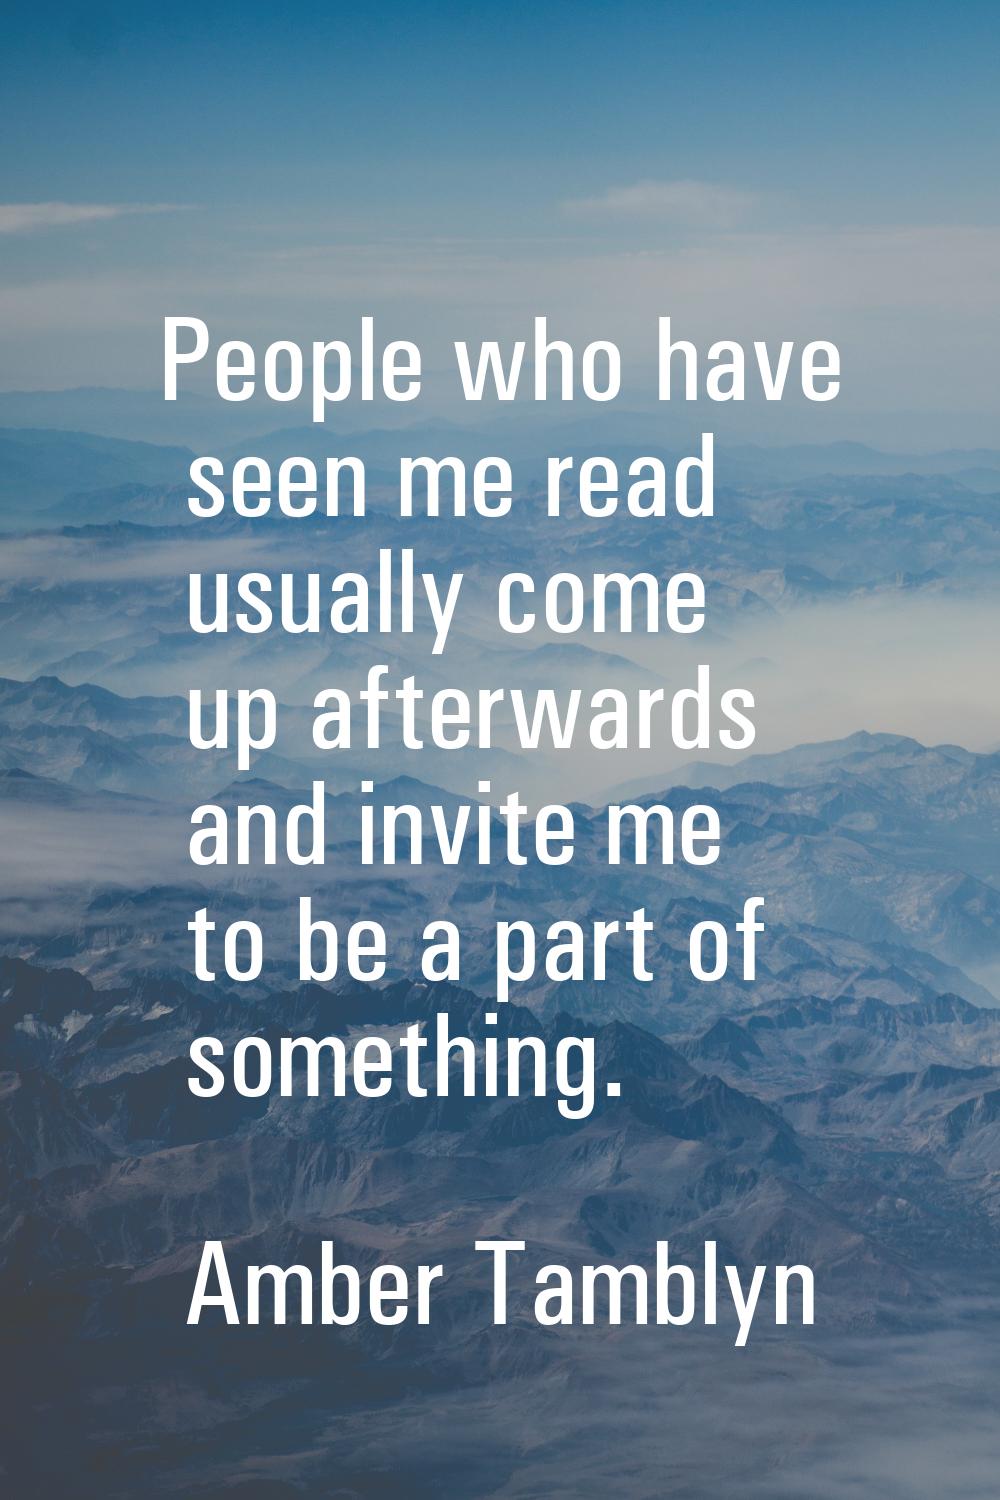 People who have seen me read usually come up afterwards and invite me to be a part of something.